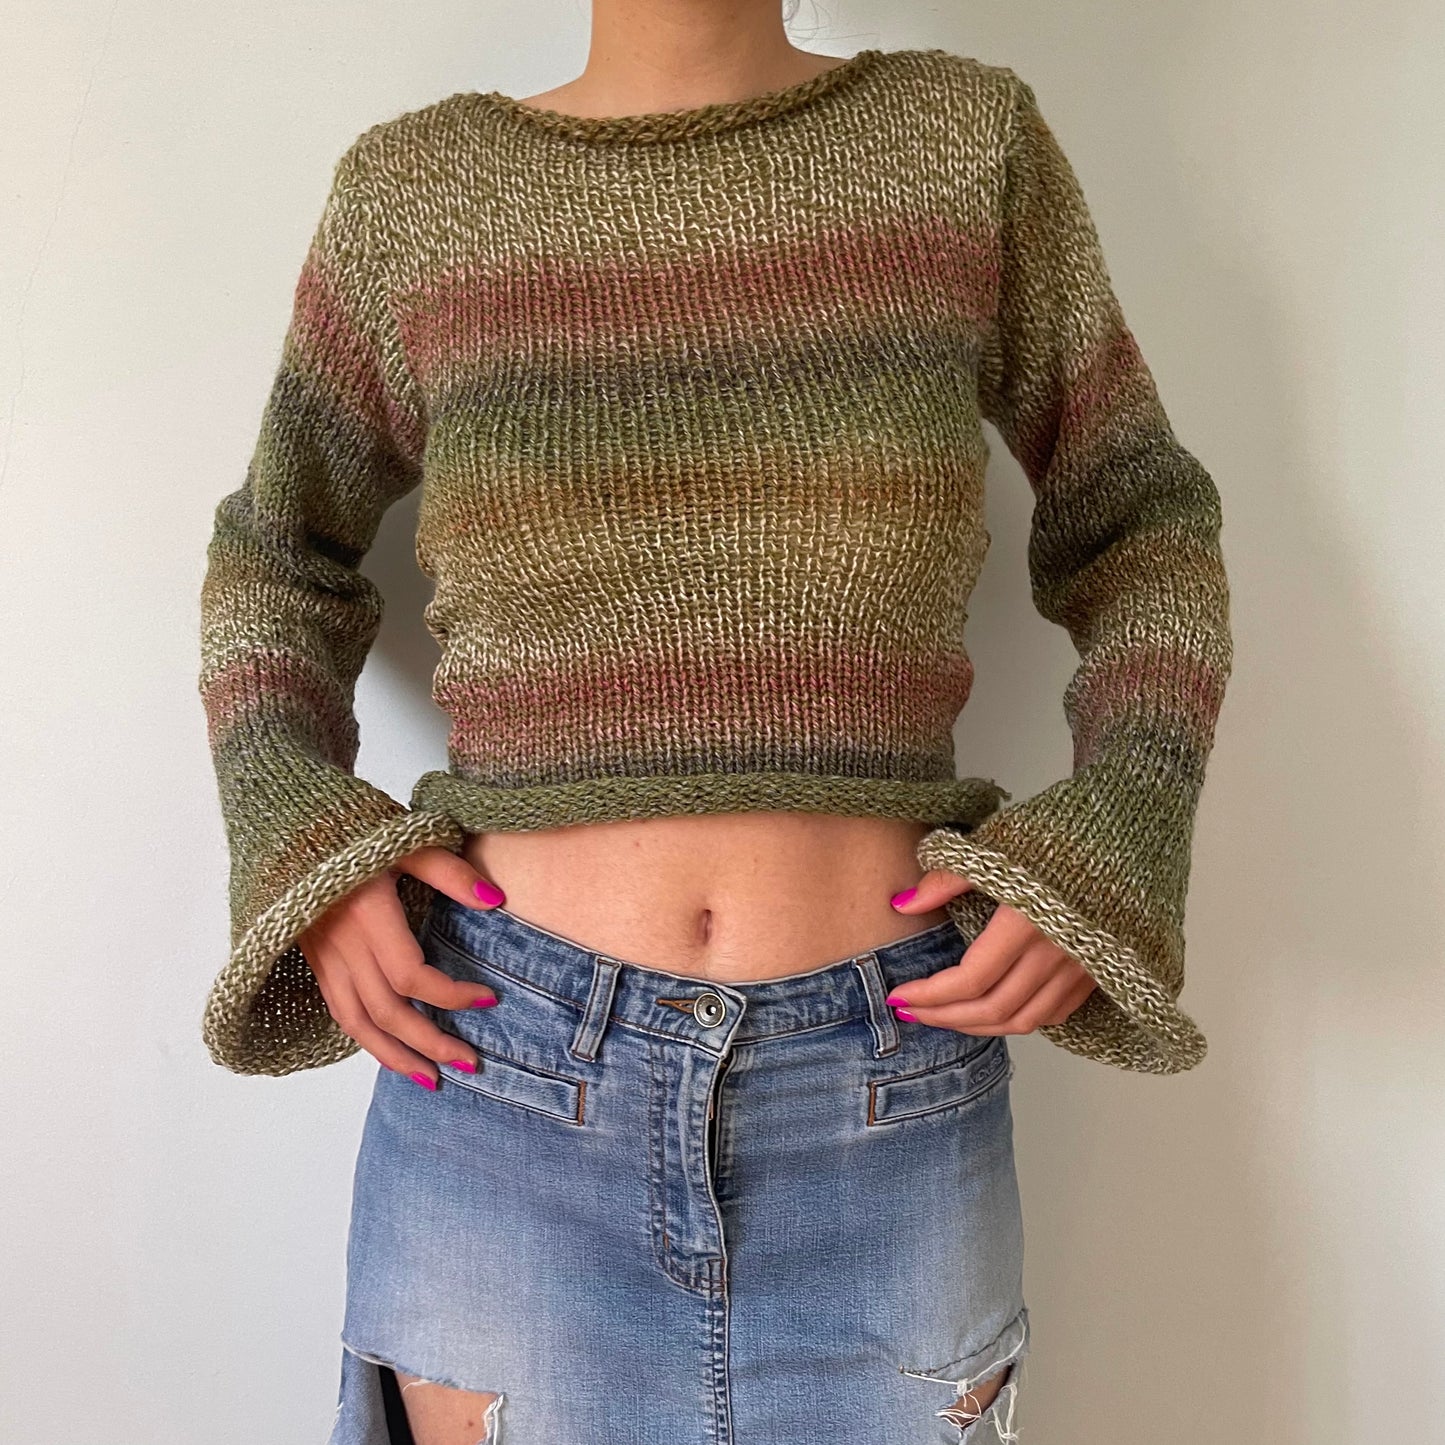 Handmade green, dusky pink and brown knitted ombré jumper